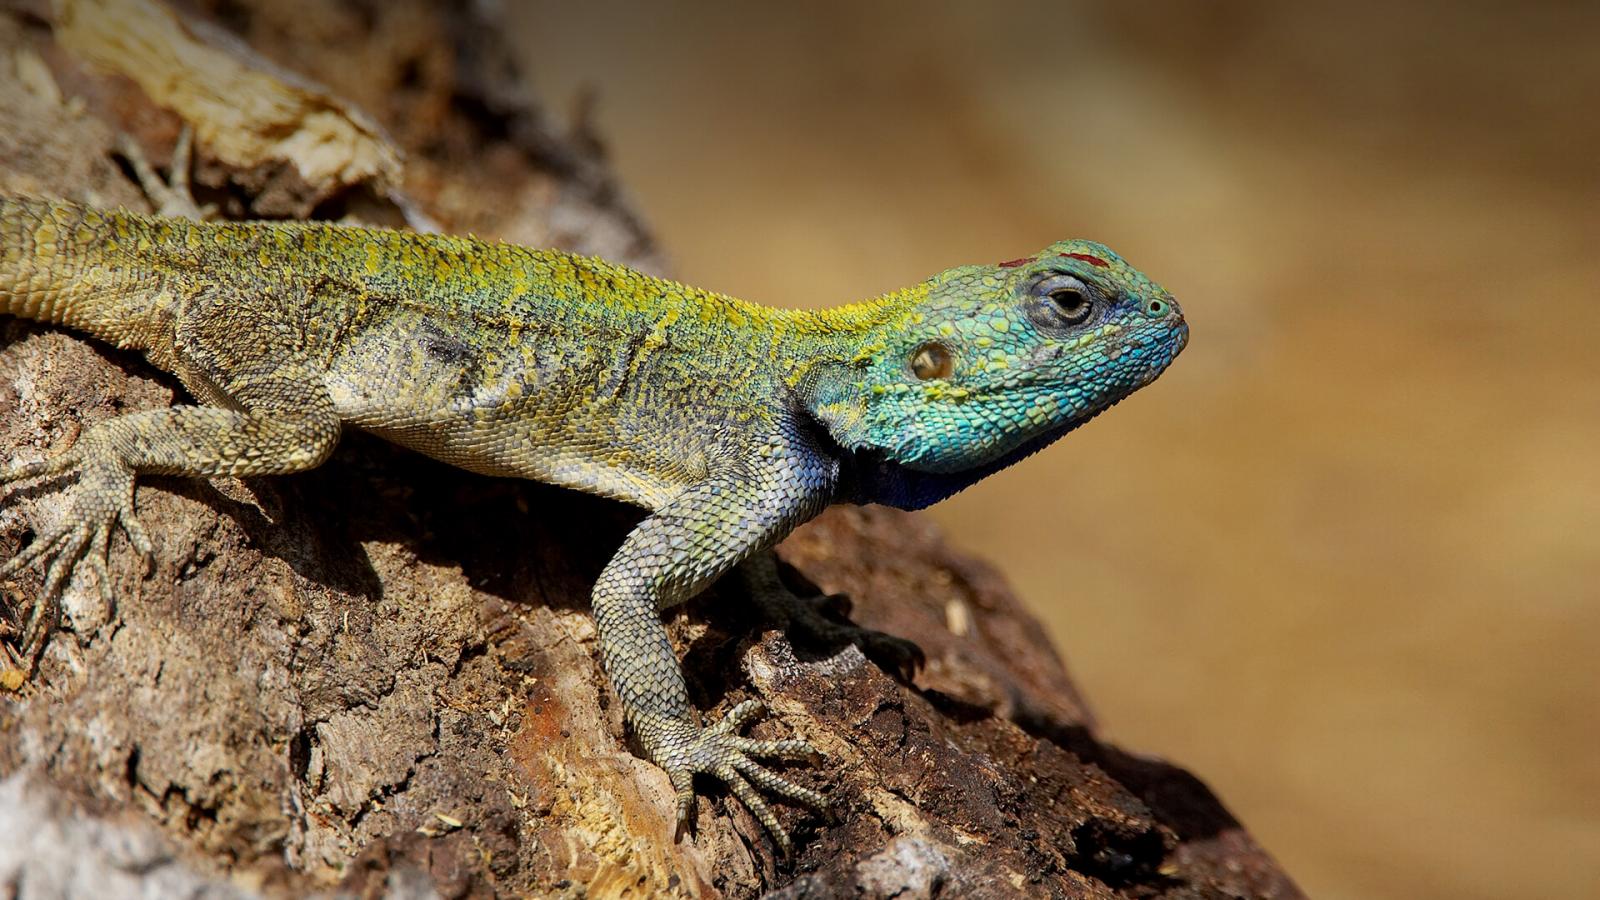 If You Get 14/17 on This Random Trivia Quiz, Then It’s Official: You Are Extremely Knowledgeable Animals Hero Lizards